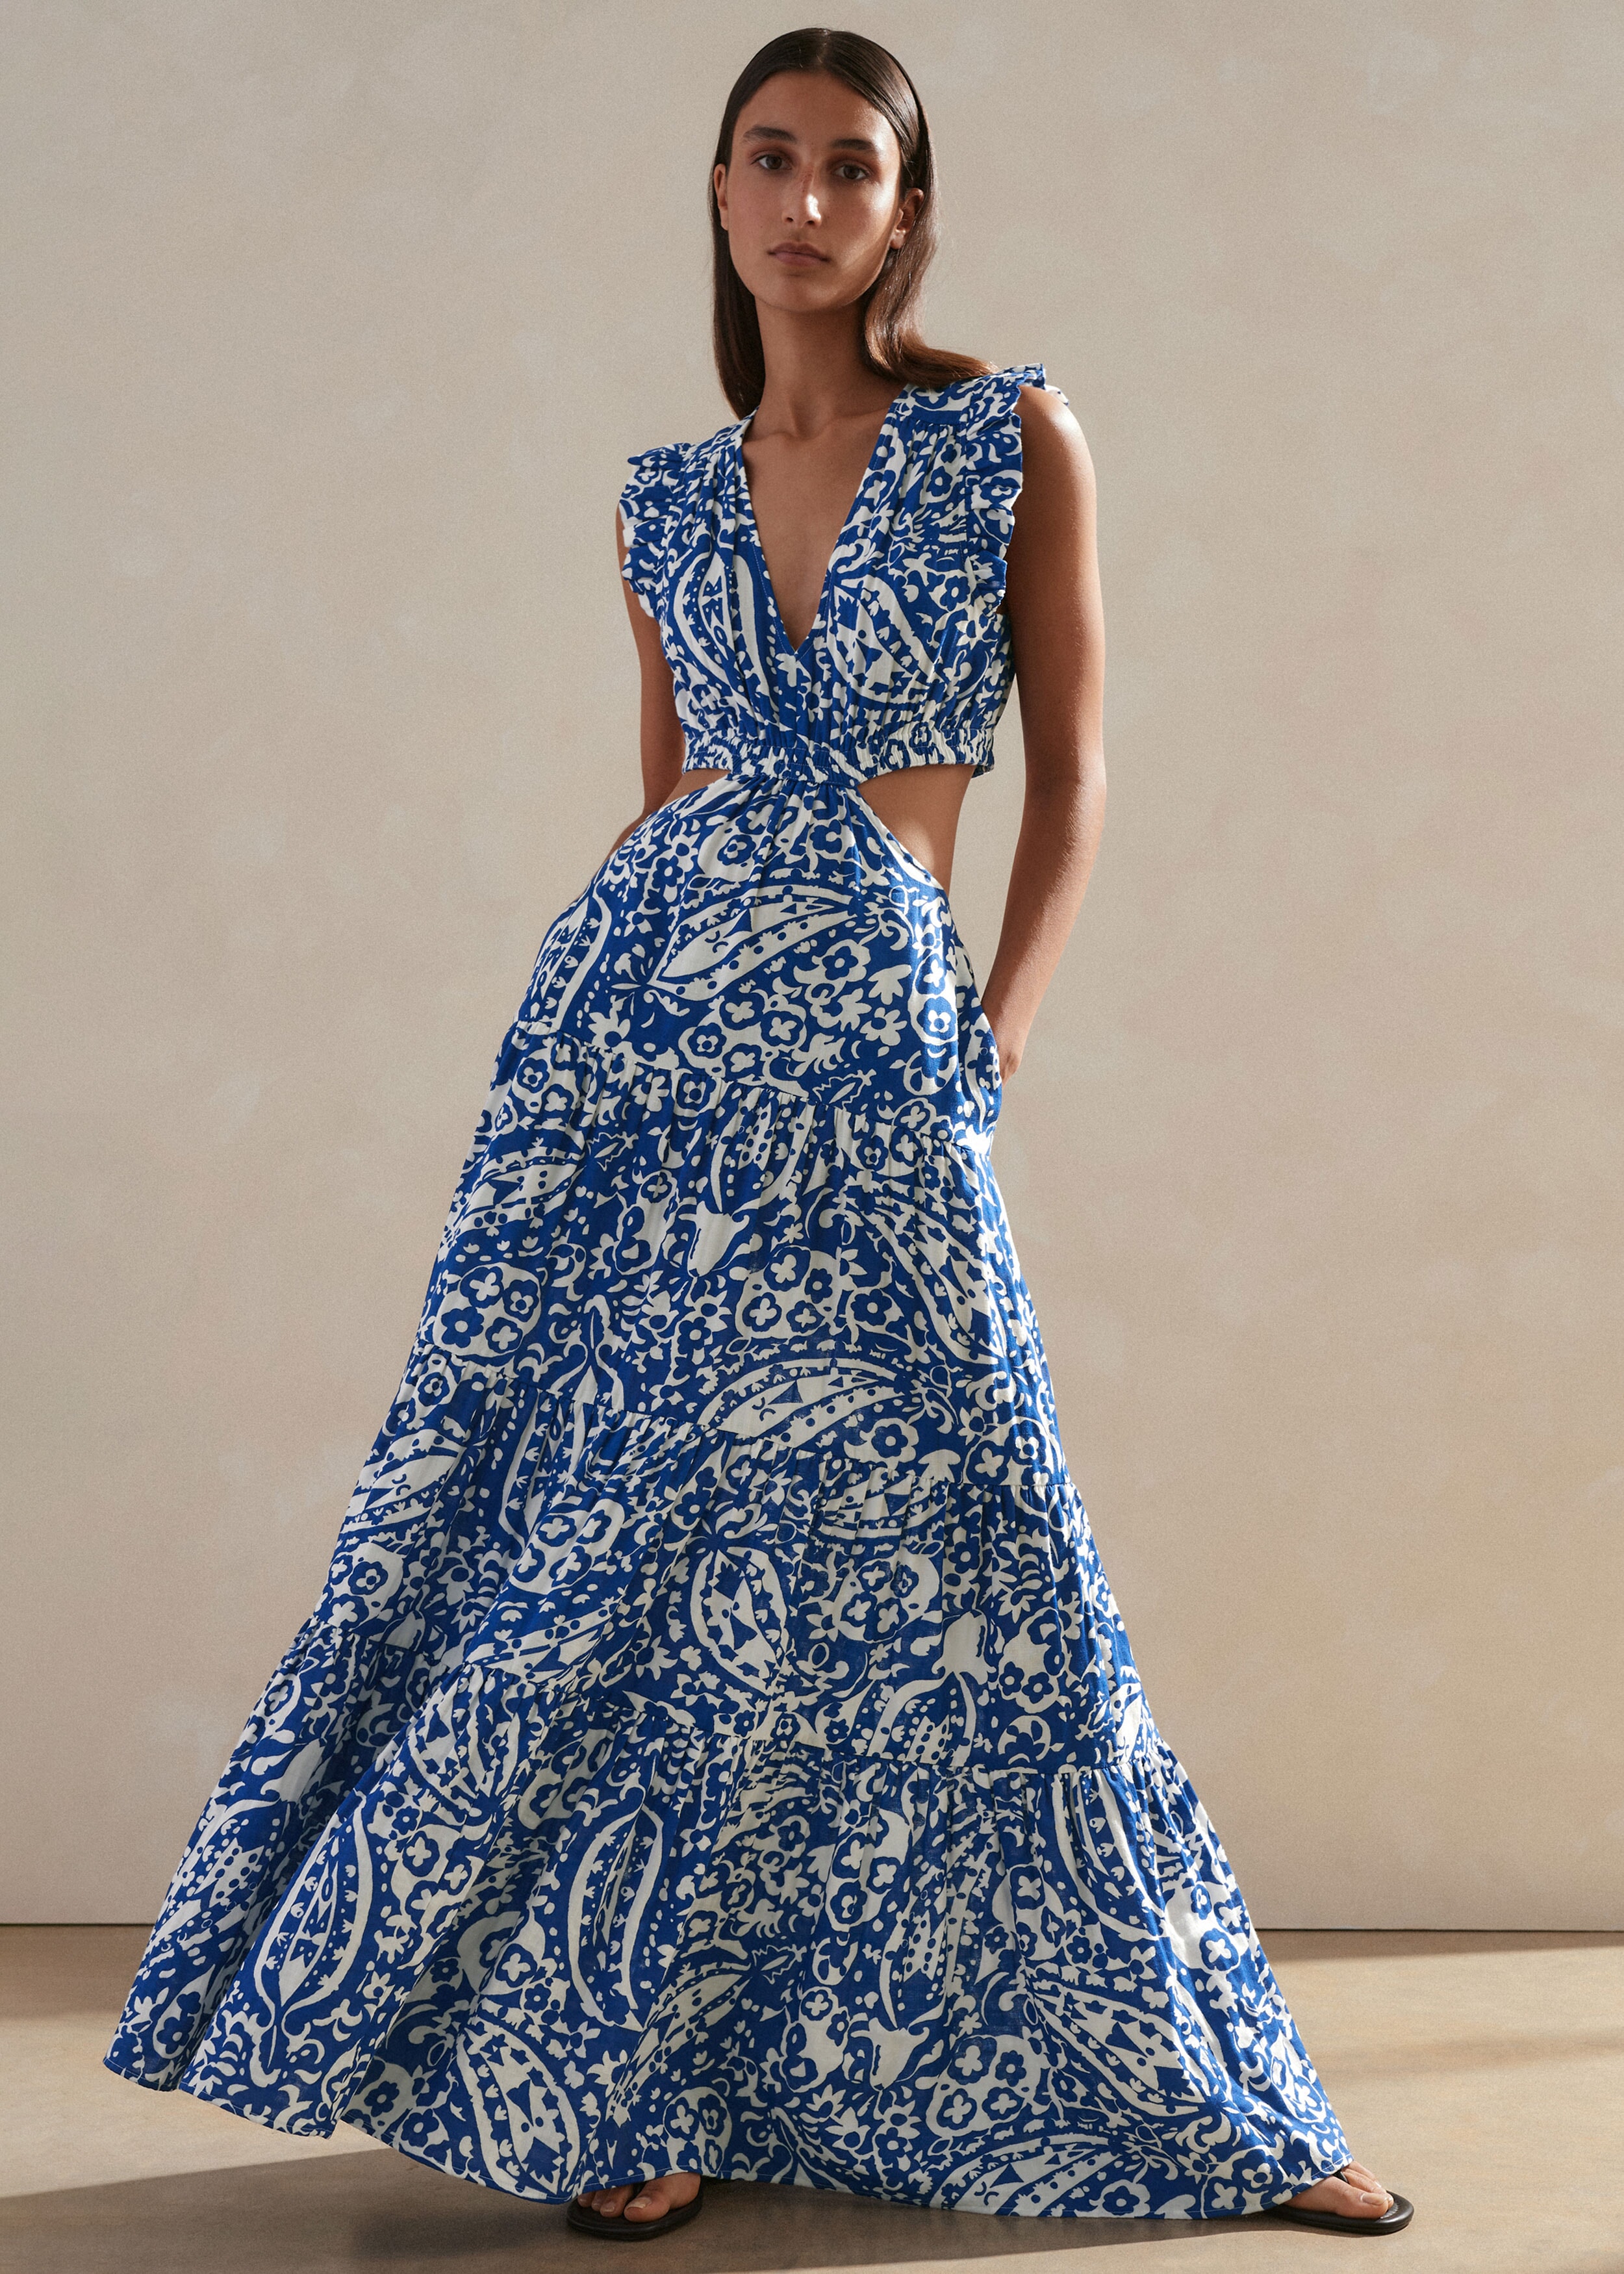 Bold Paisley Print Cheesecloth Cut-Out Maxi Dress